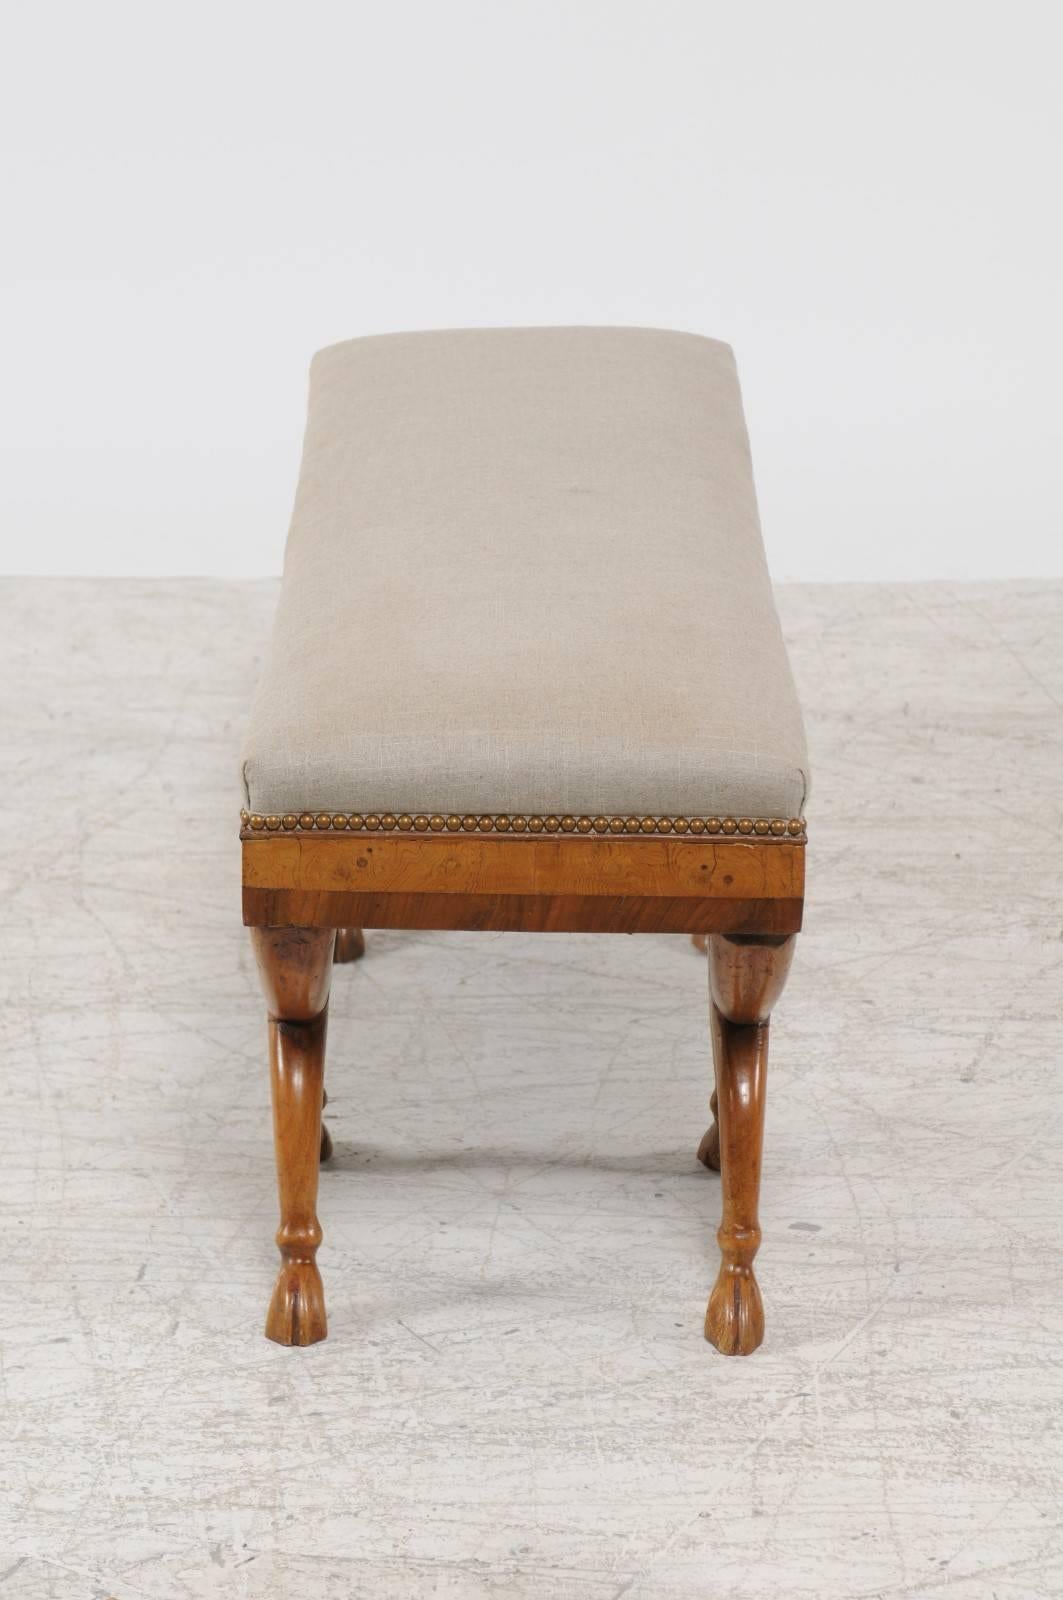 Upholstery Austrian Biedermeier 1840s Double X-Form Base Upholstered Bench with Hoofed Feet